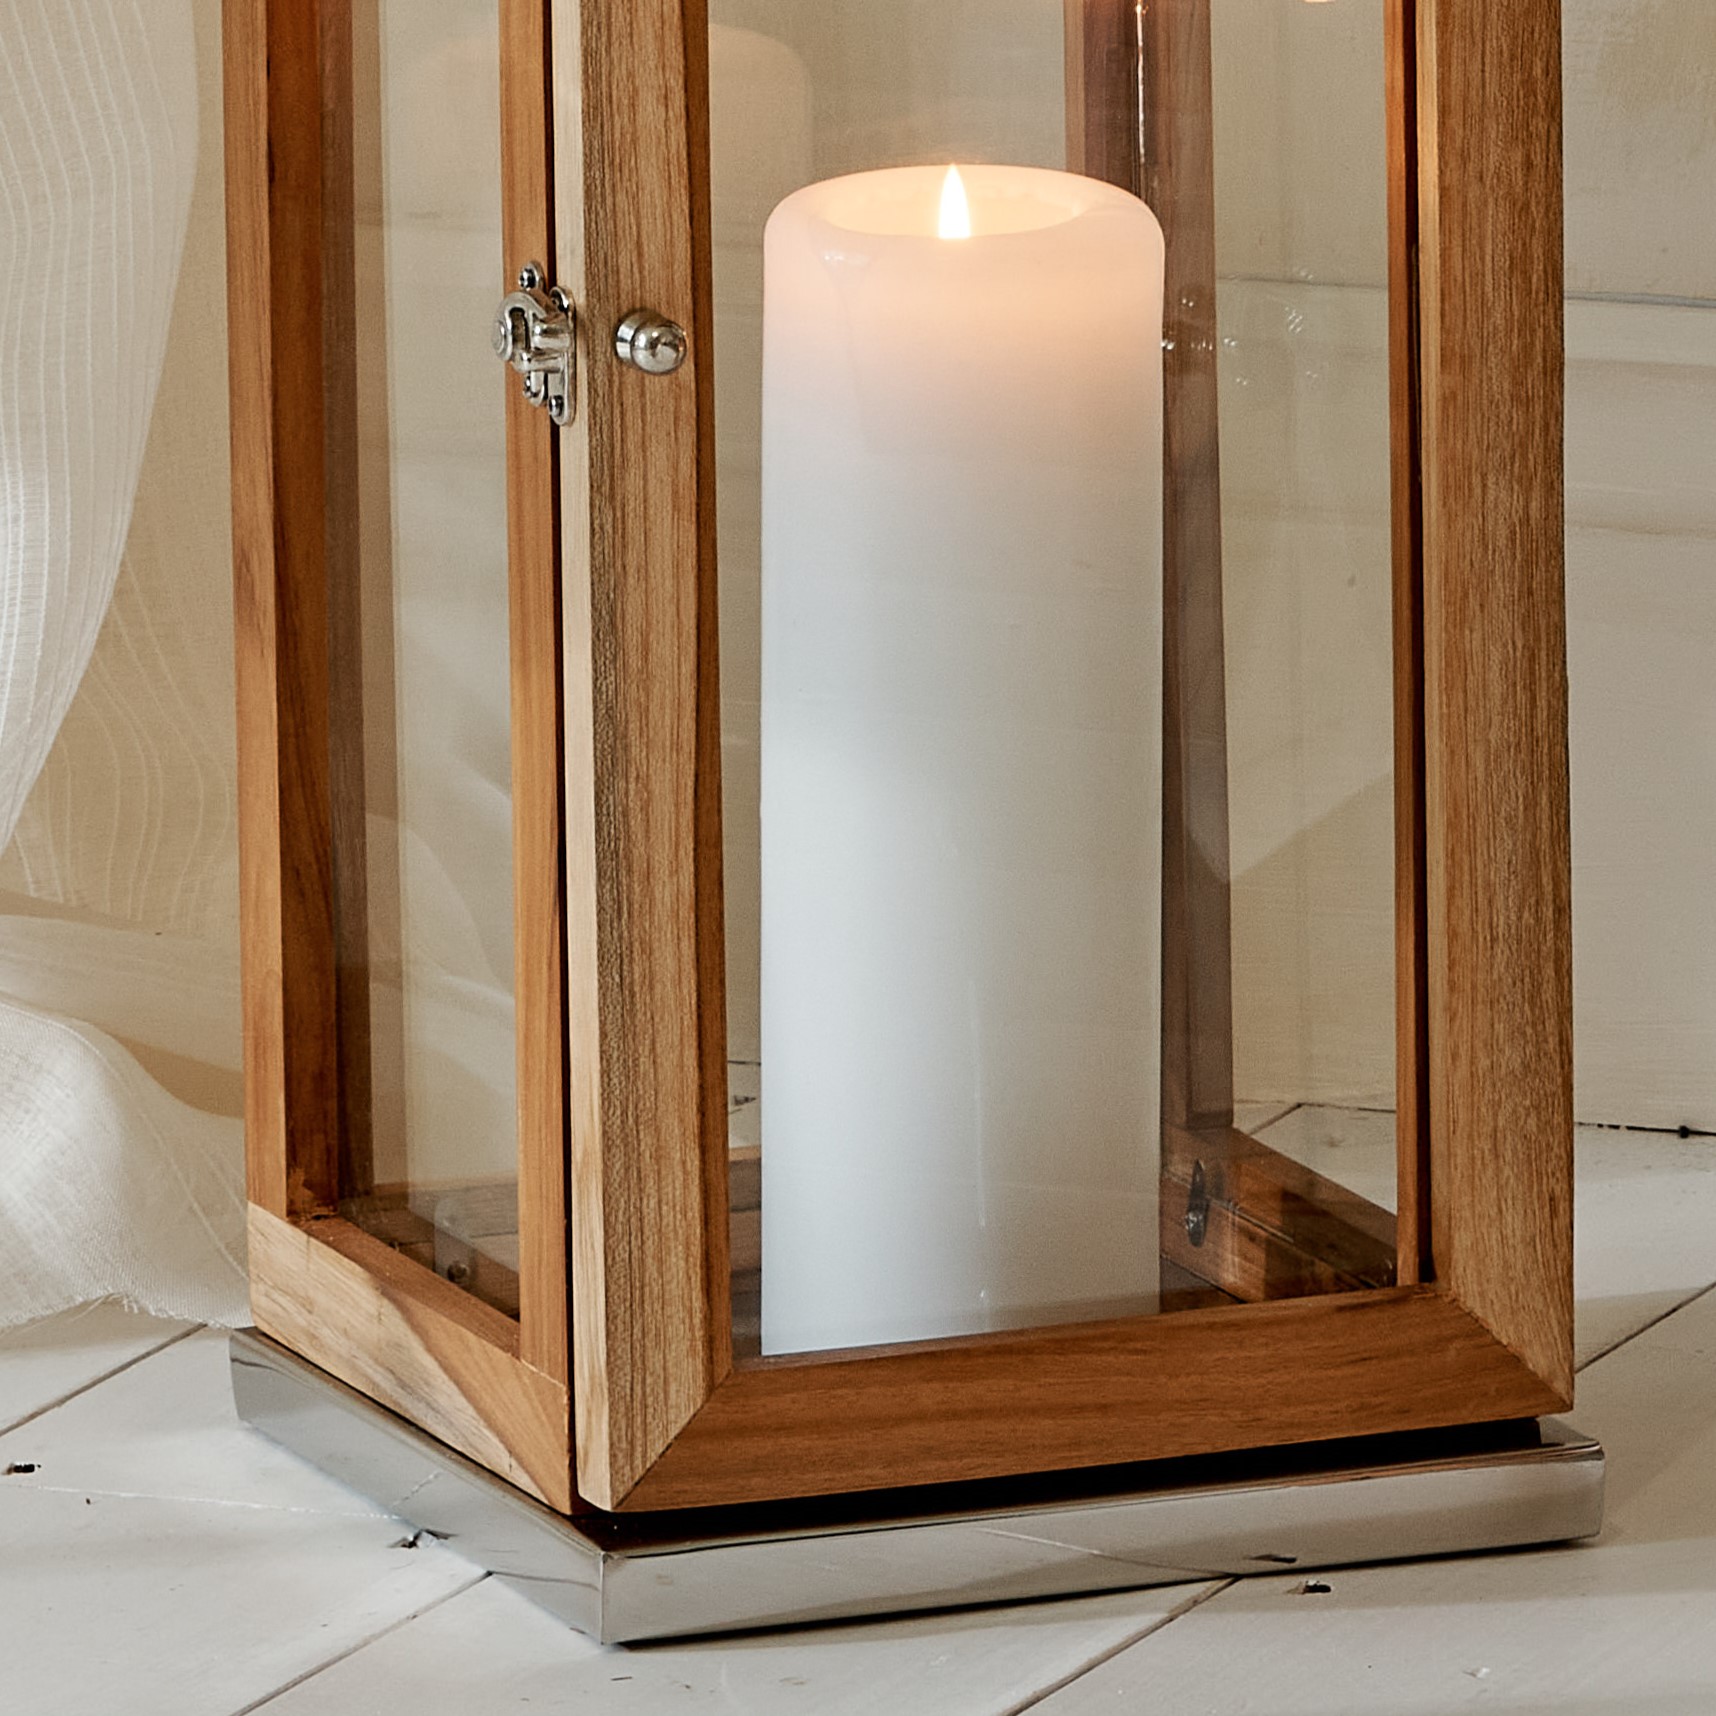 Close up of Mango wood and stainless steel candle lantern base with white pillar candle